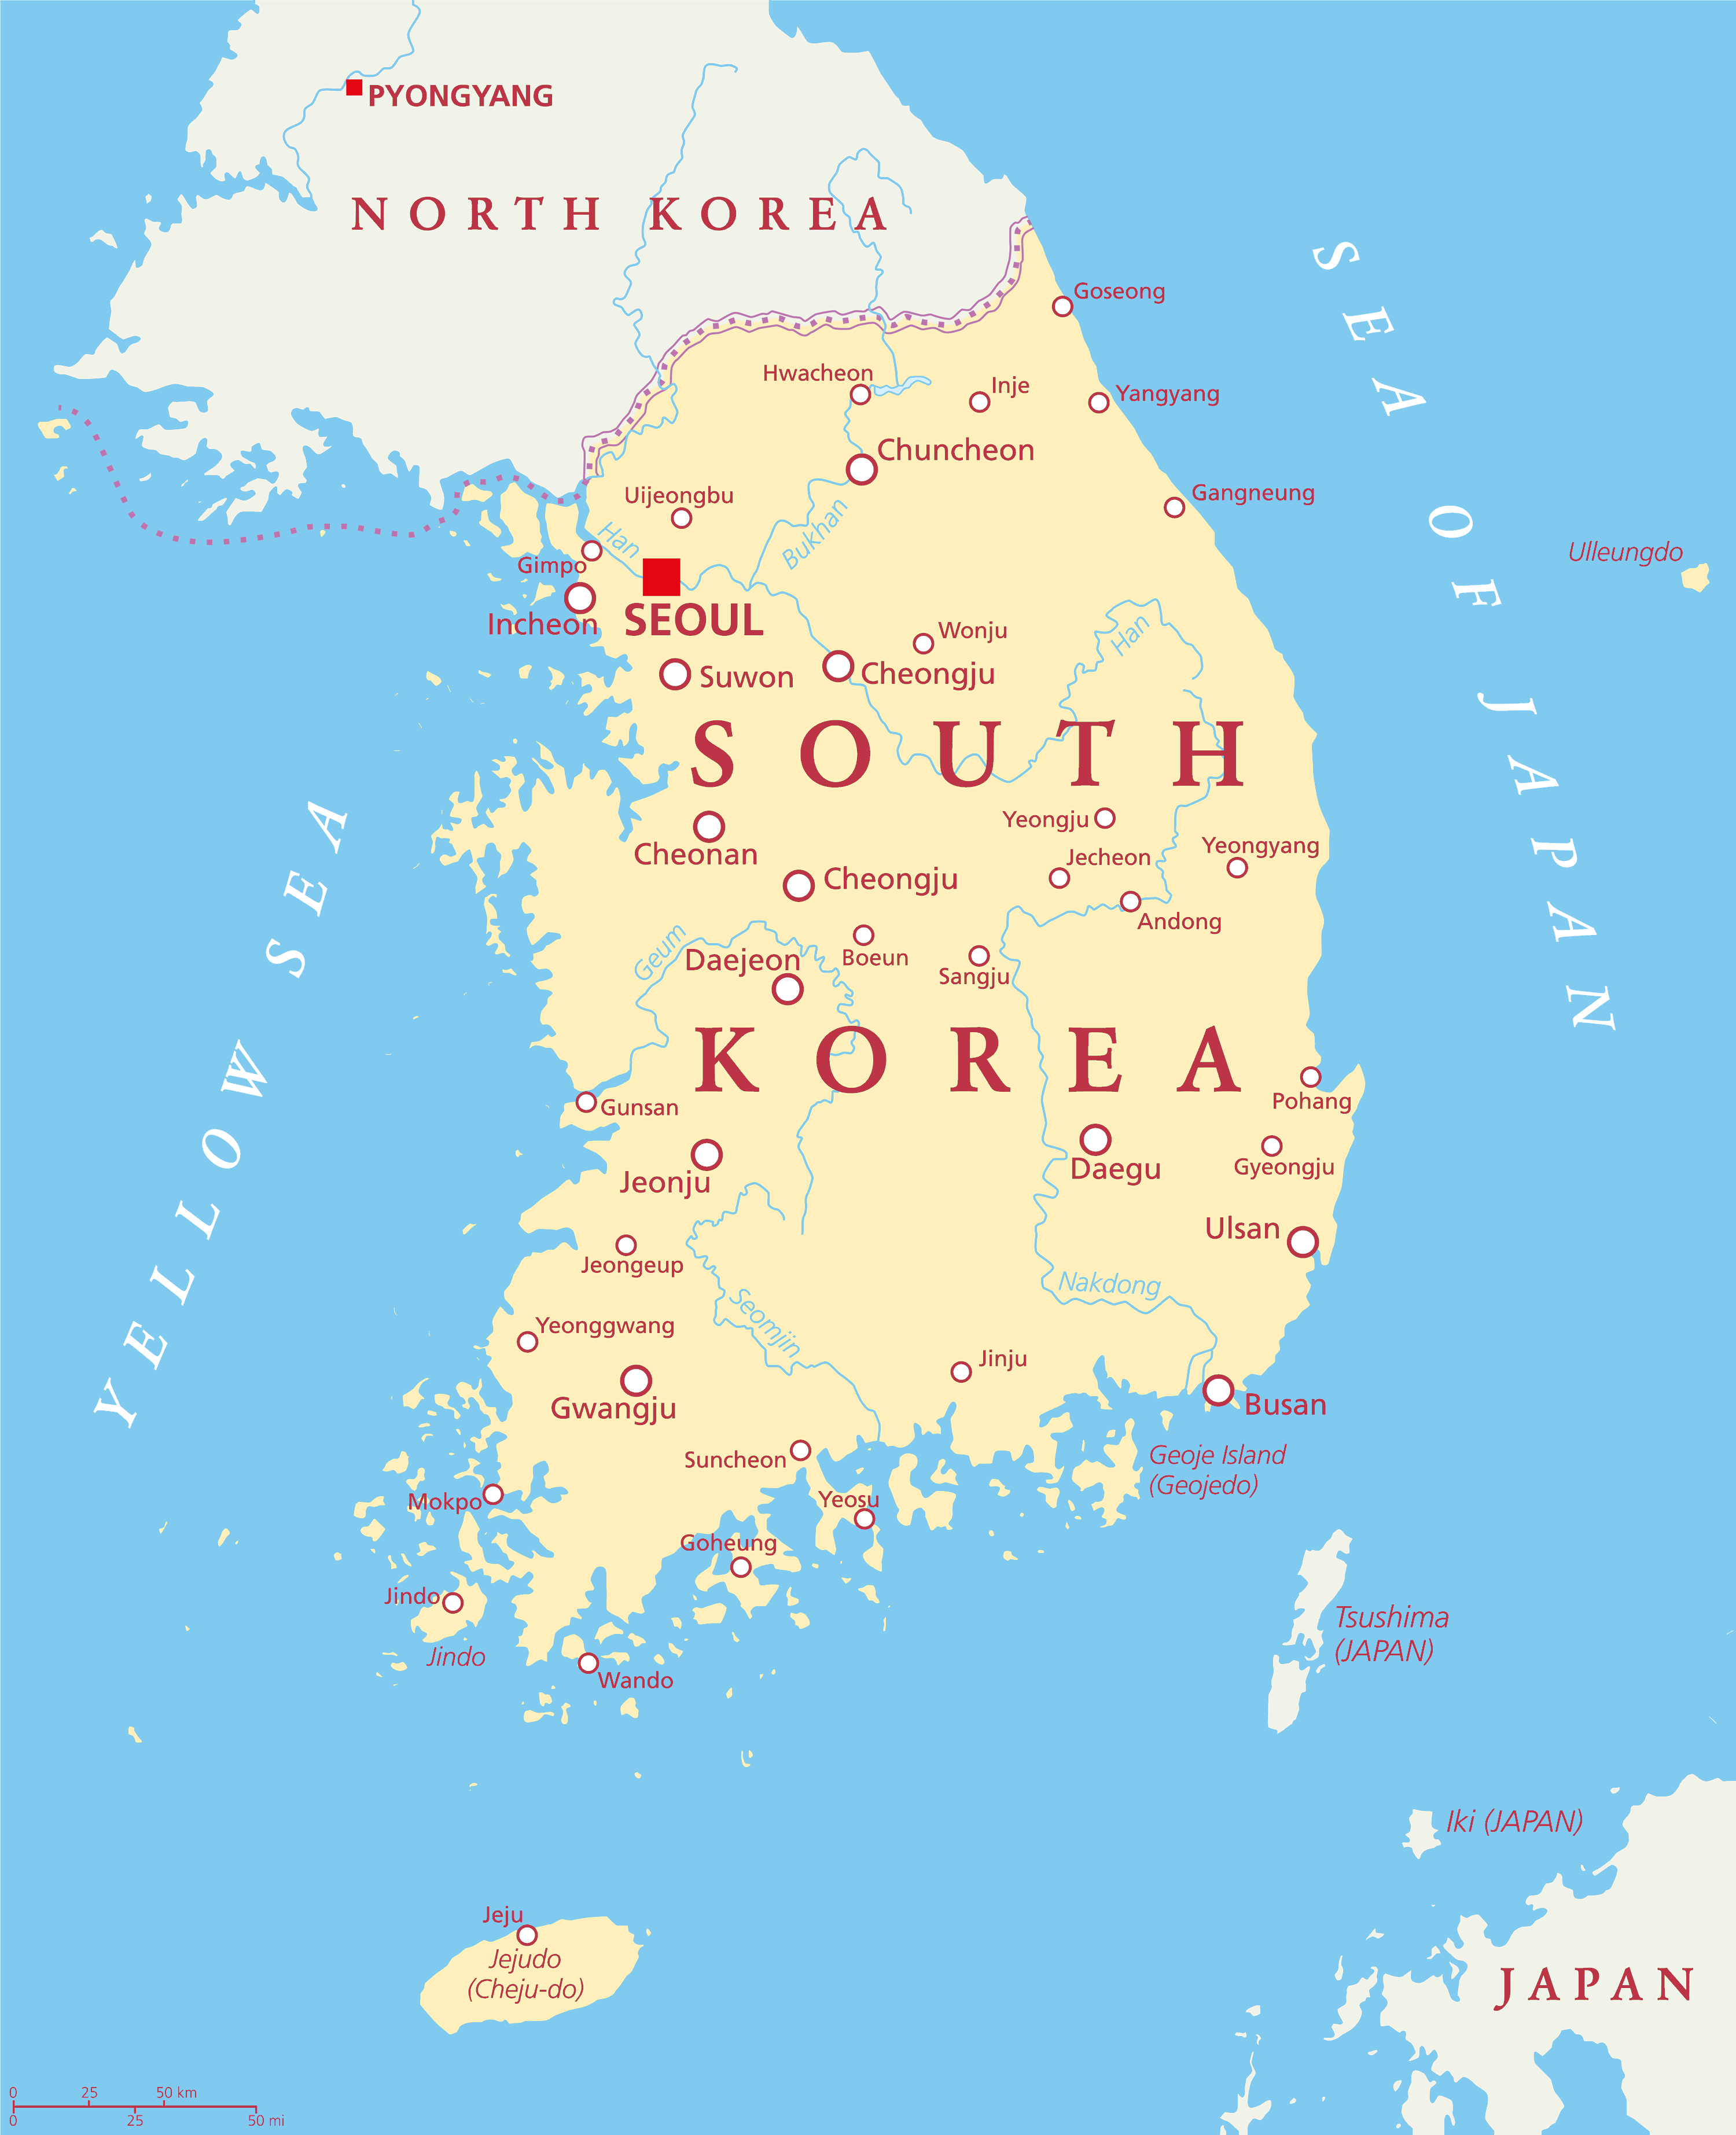 South Korea Map - Guide of the World